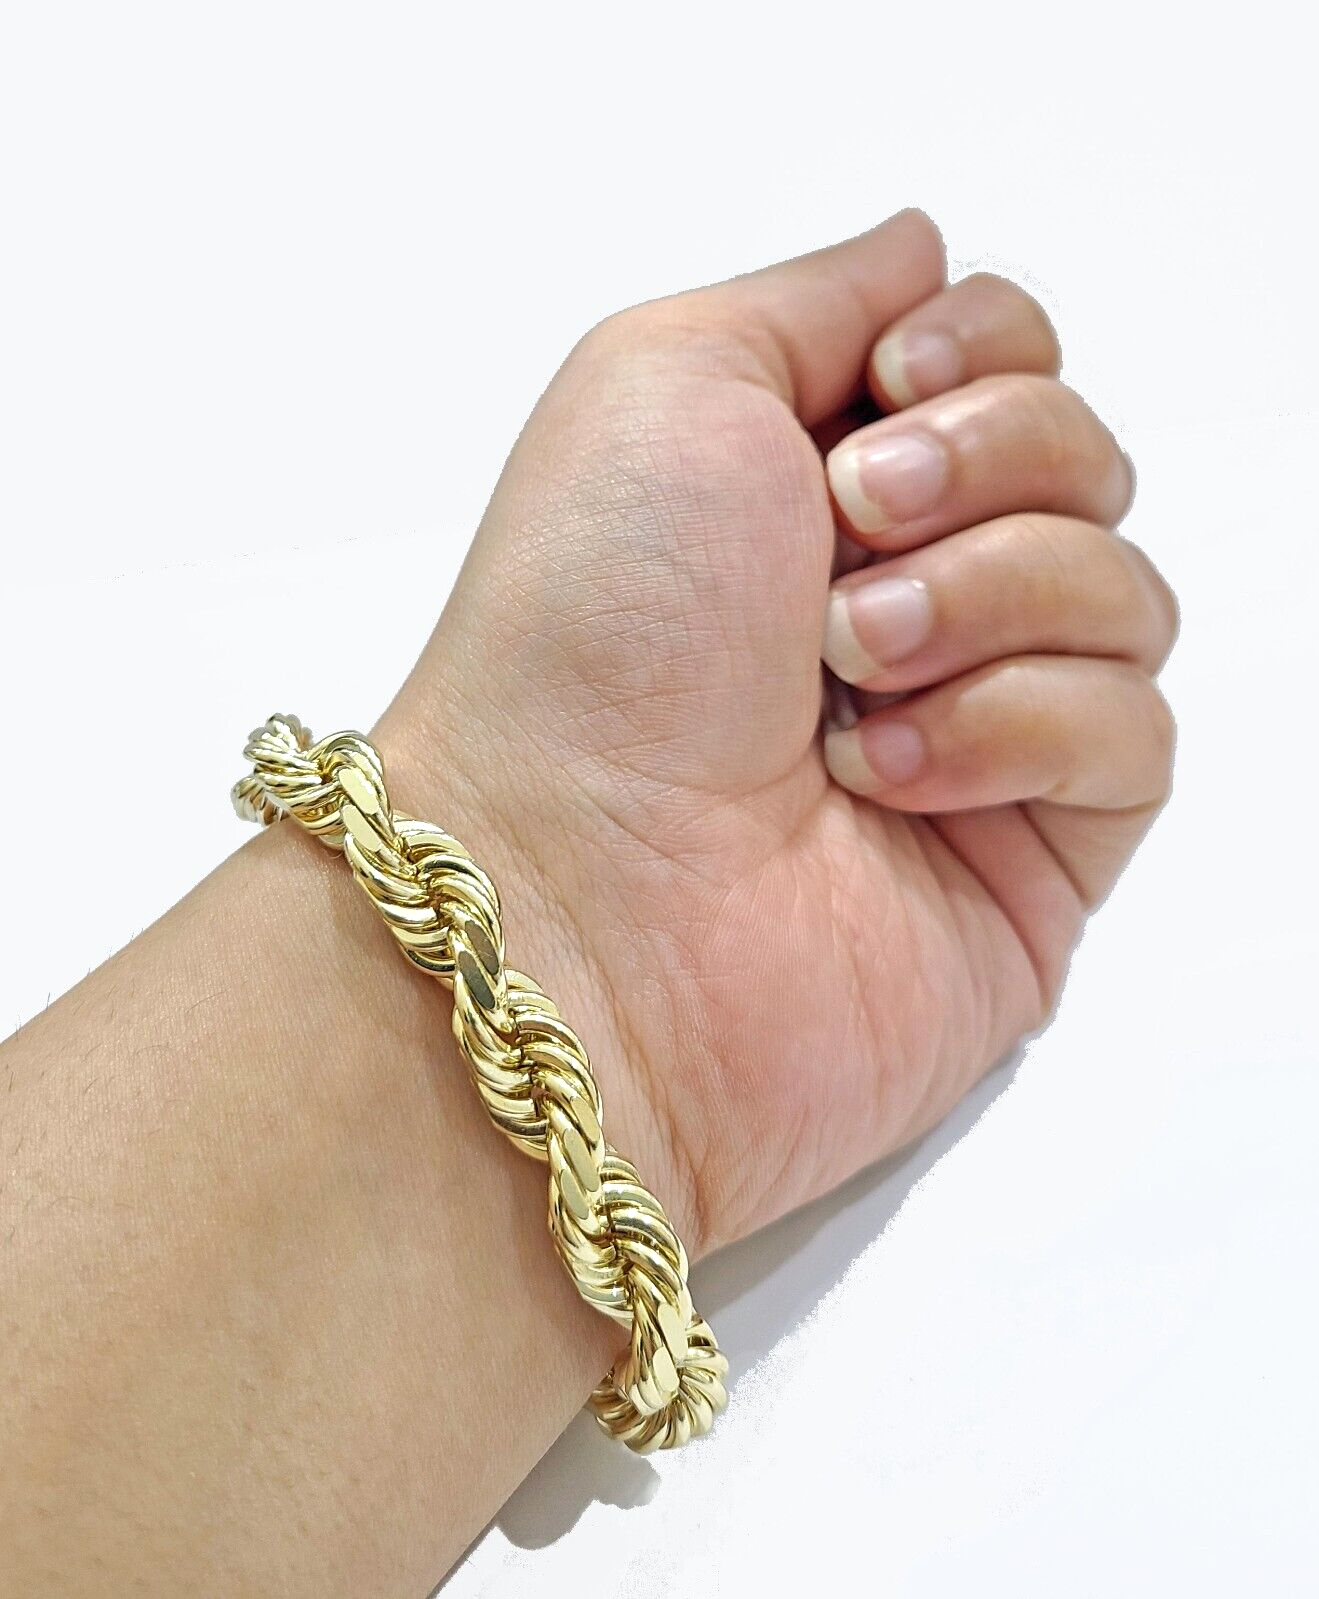 Real 10K Yellow Solid Gold 10mm Rope Bracelet 9'' inch 10kt unisex